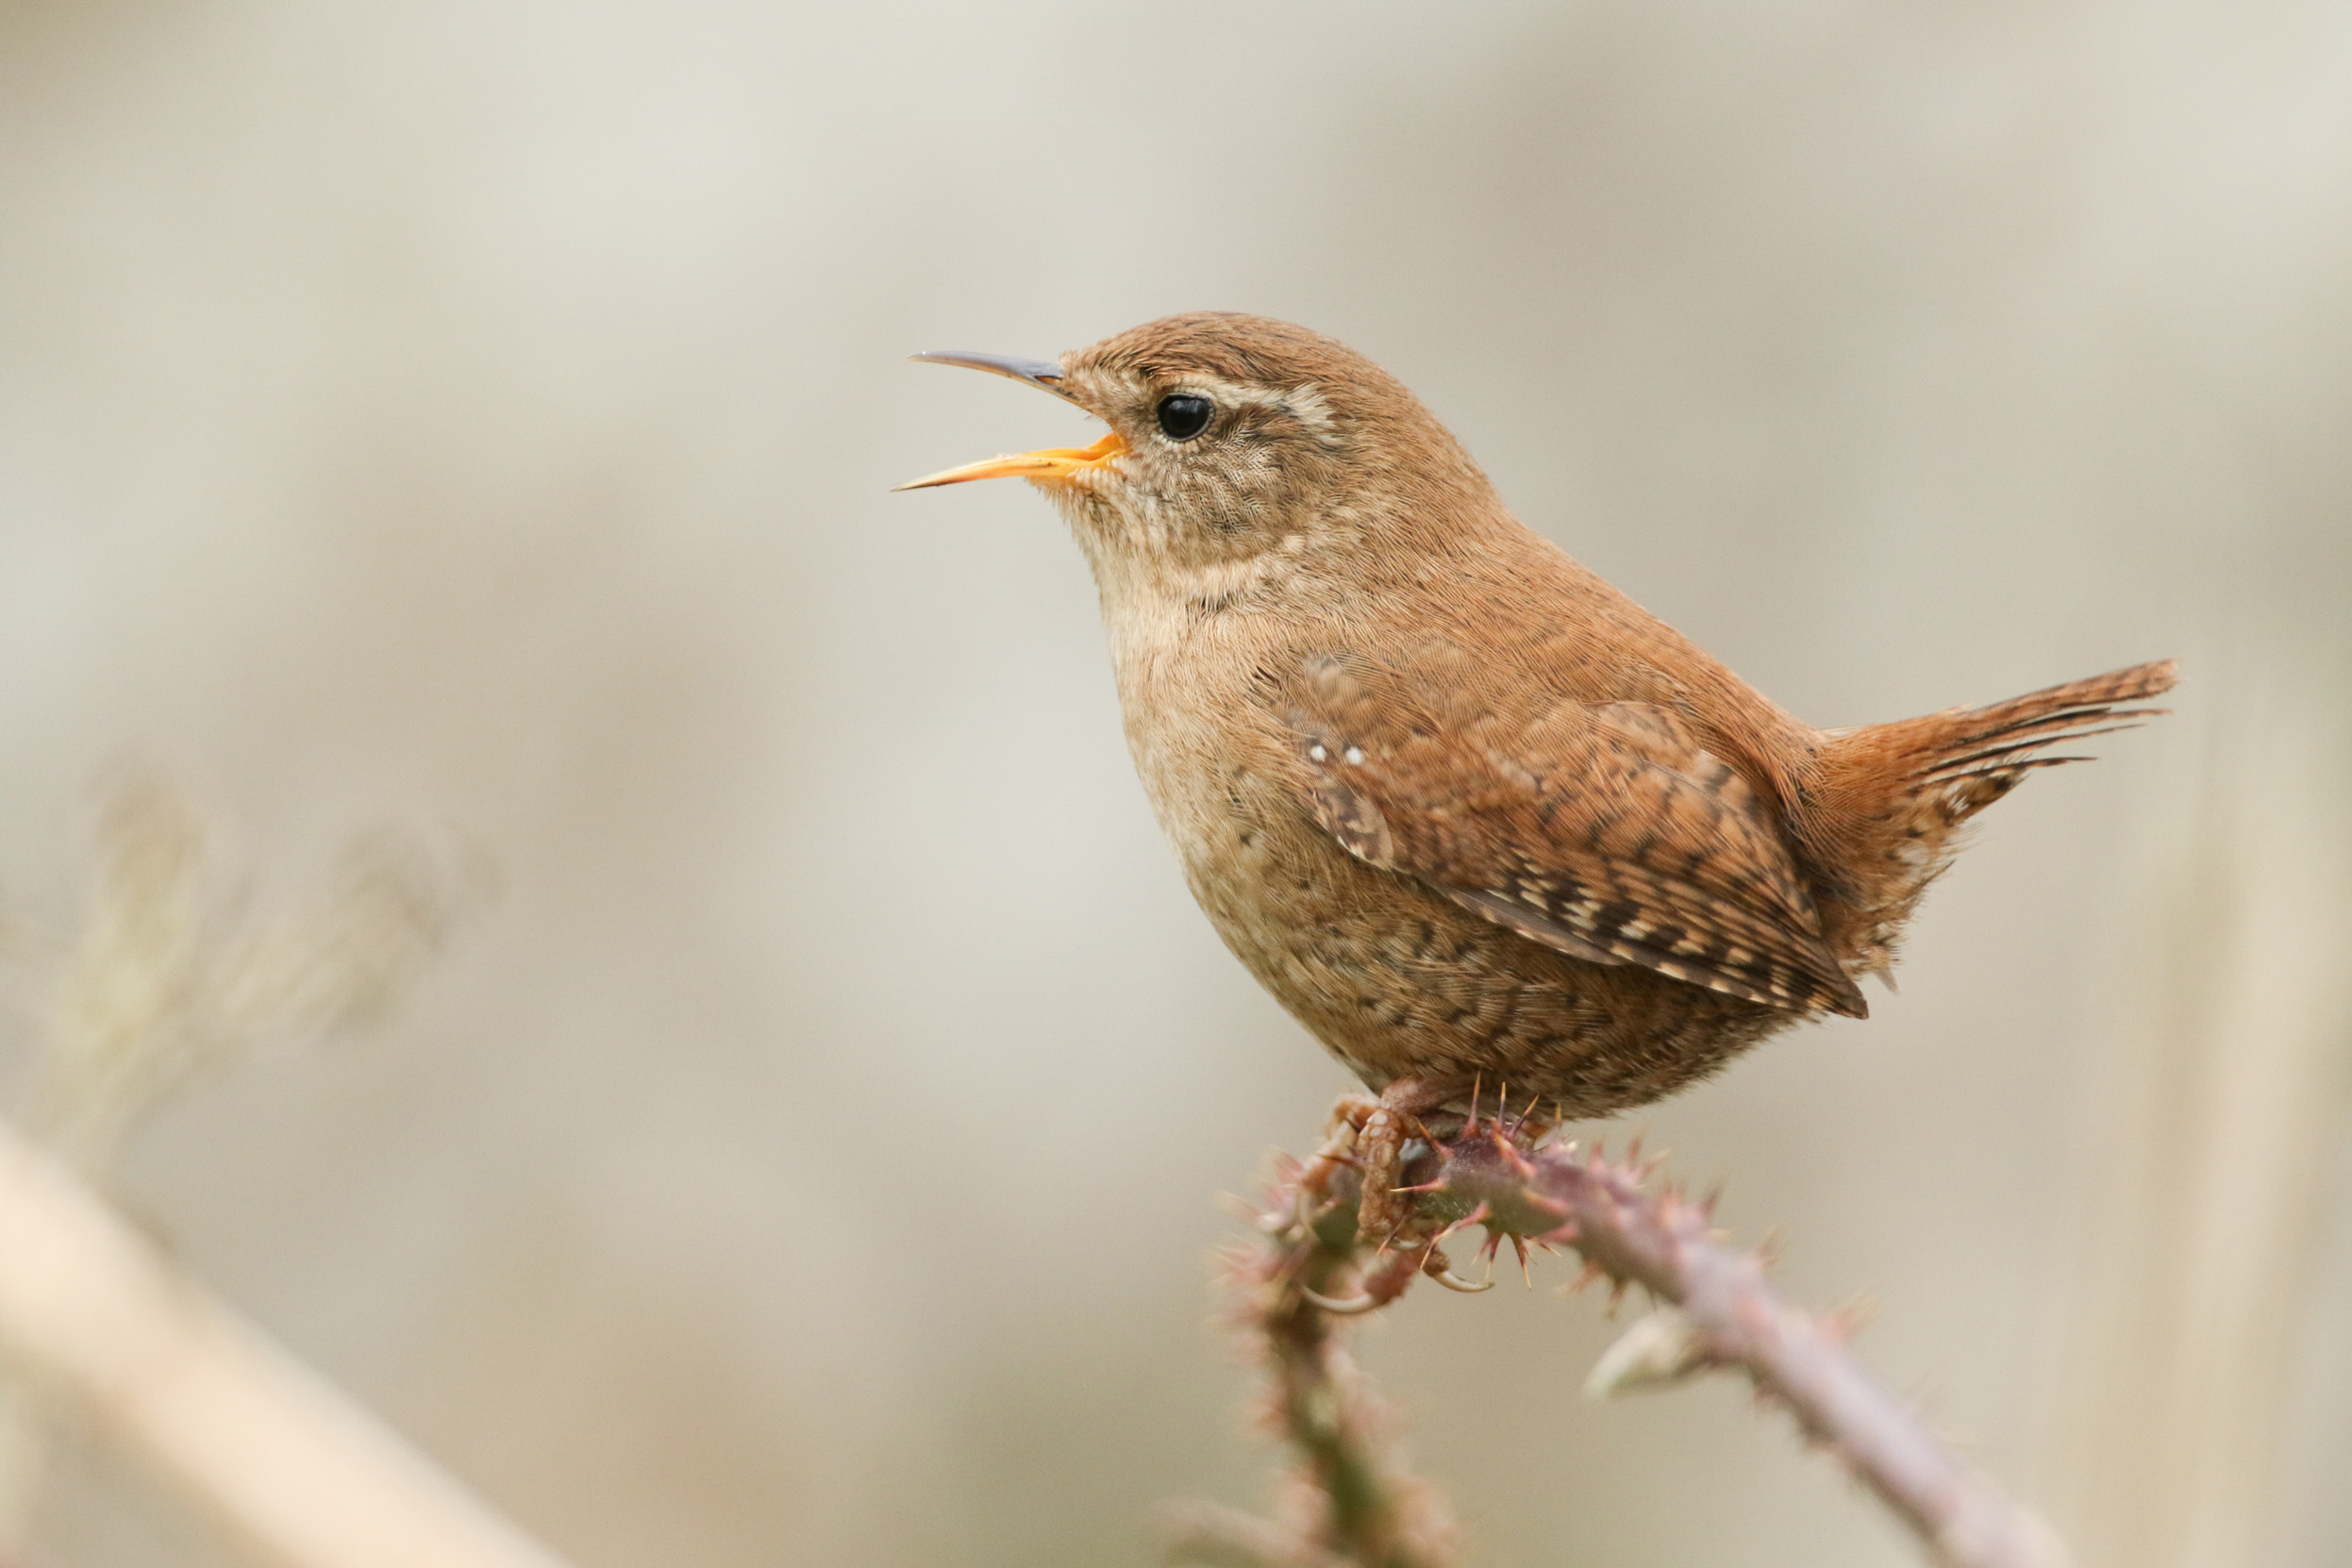 A close up view of a Wren singing on a thorn covered branch.